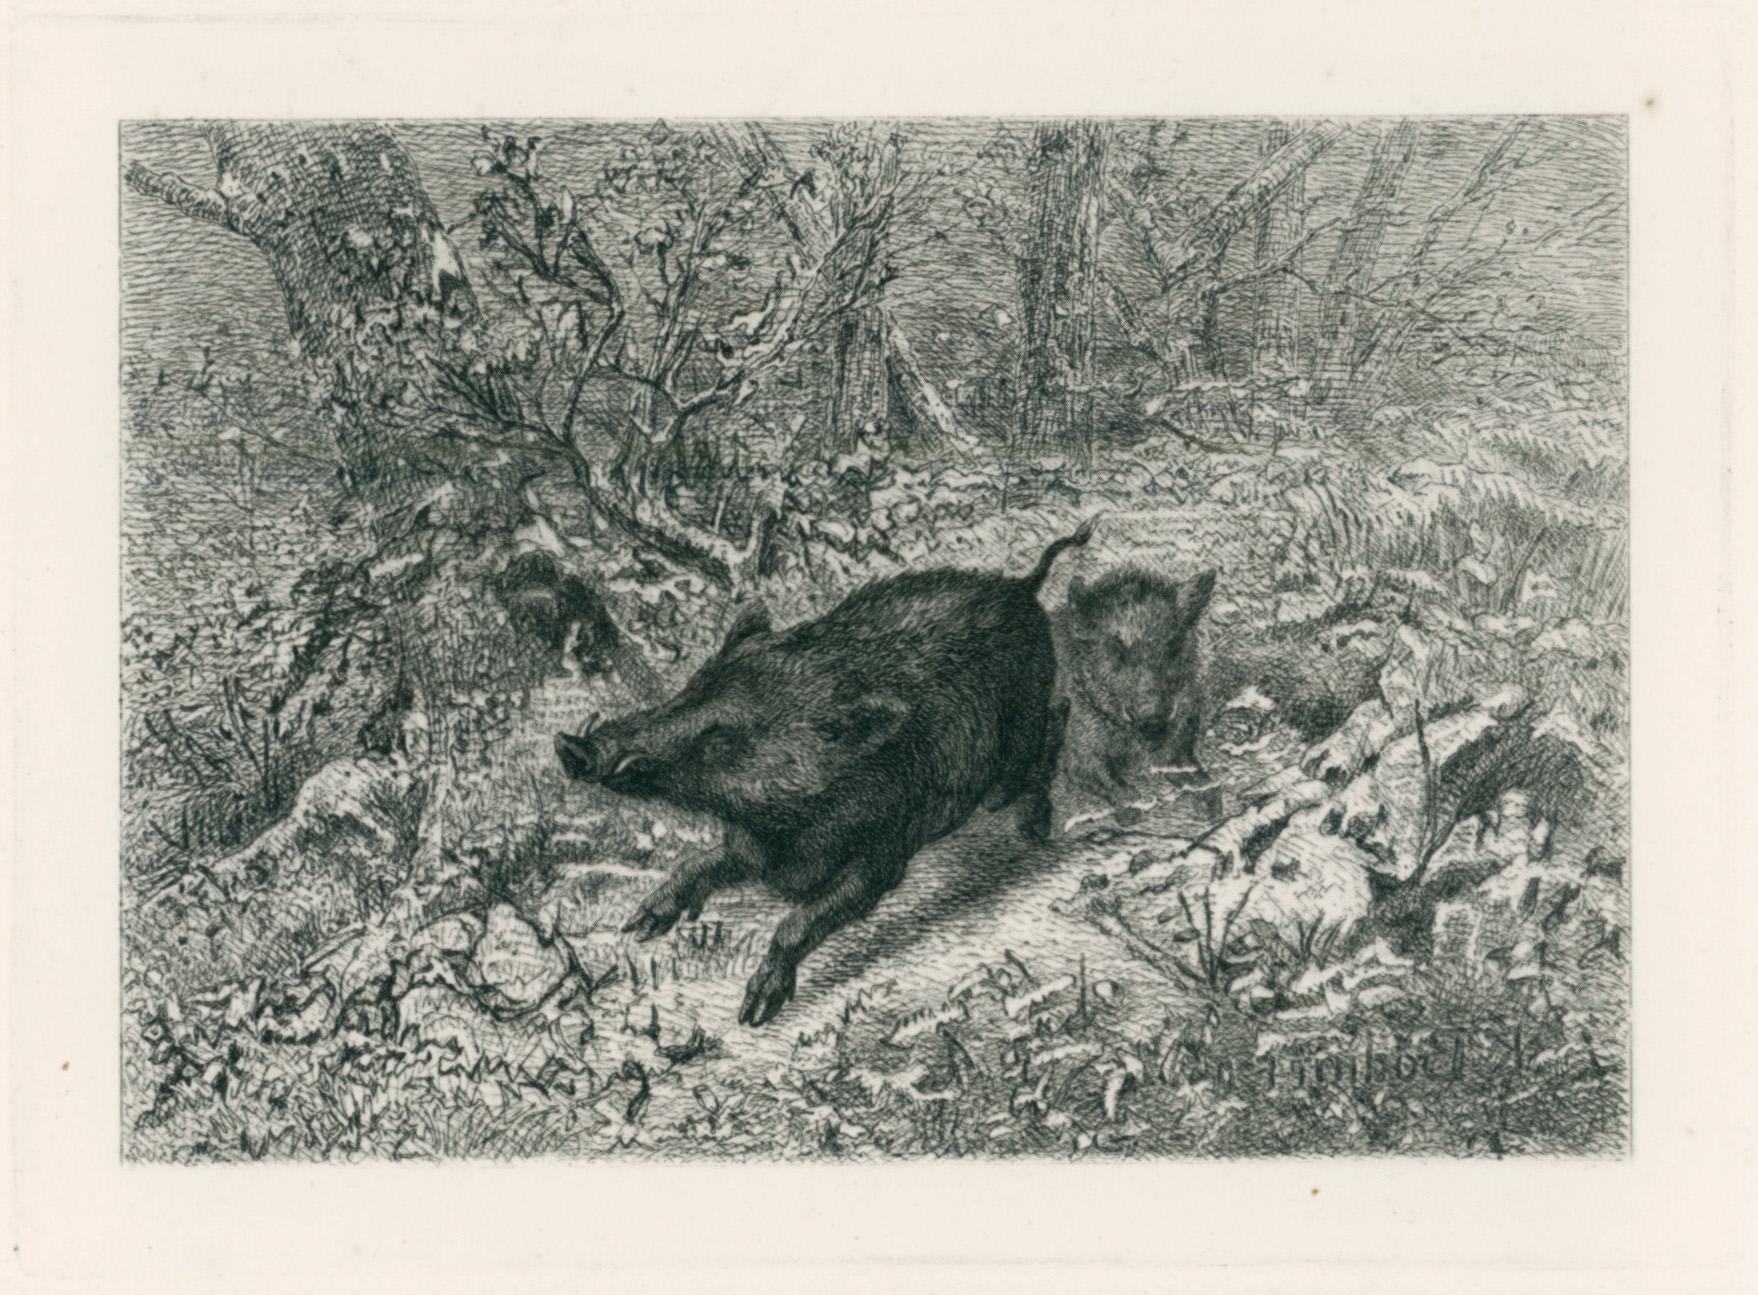 Karl Bodmer Figurative Print - Wild Boar, from Eaux-Fortes Animaux & Paysages: Sanglier